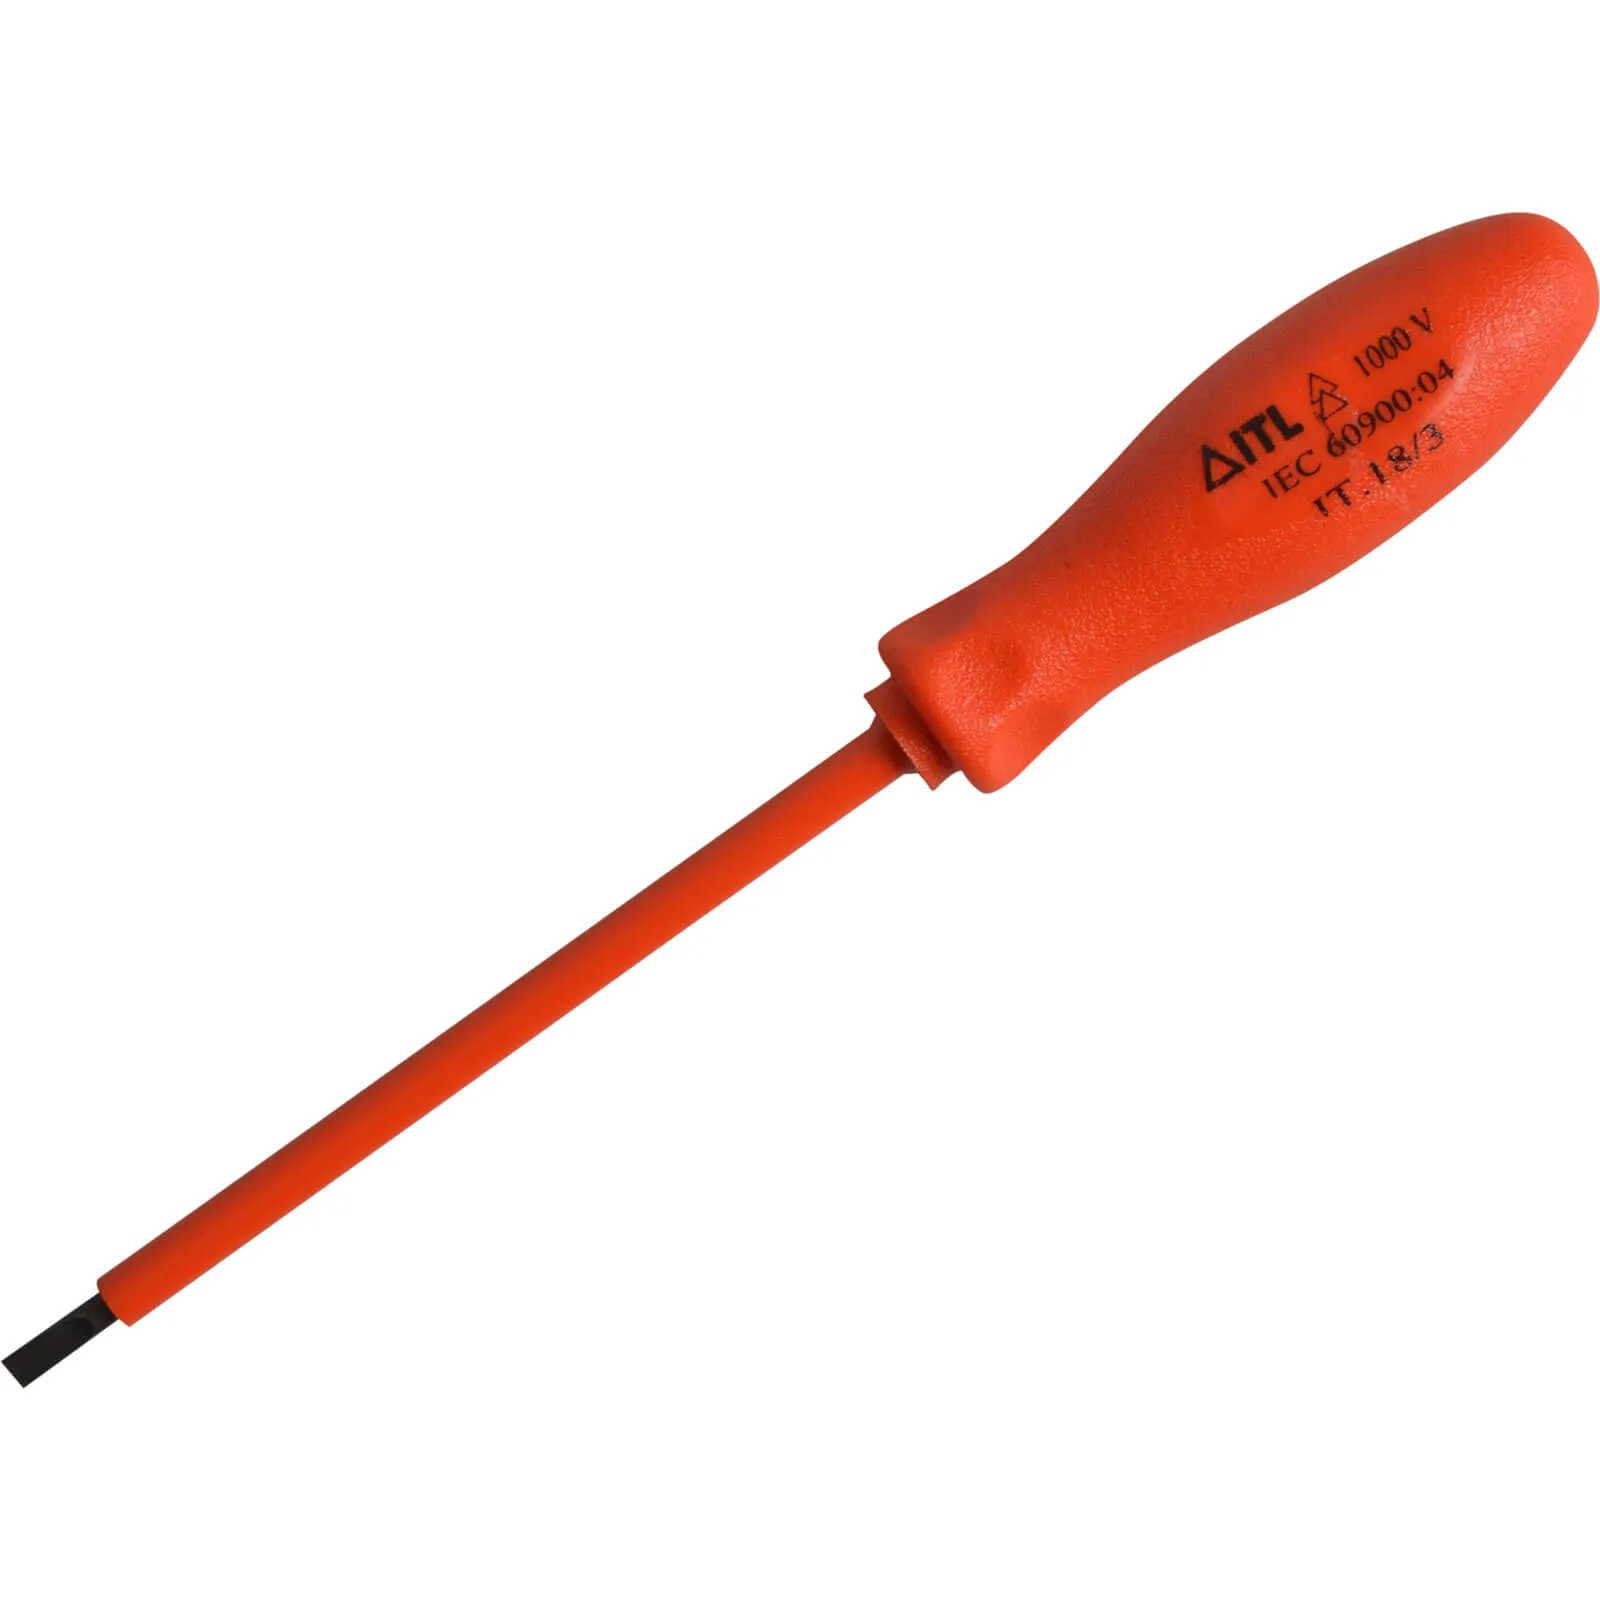 ITL Insulated Parallel Slotted Terminal Screwdriver - 3mm, 75mm